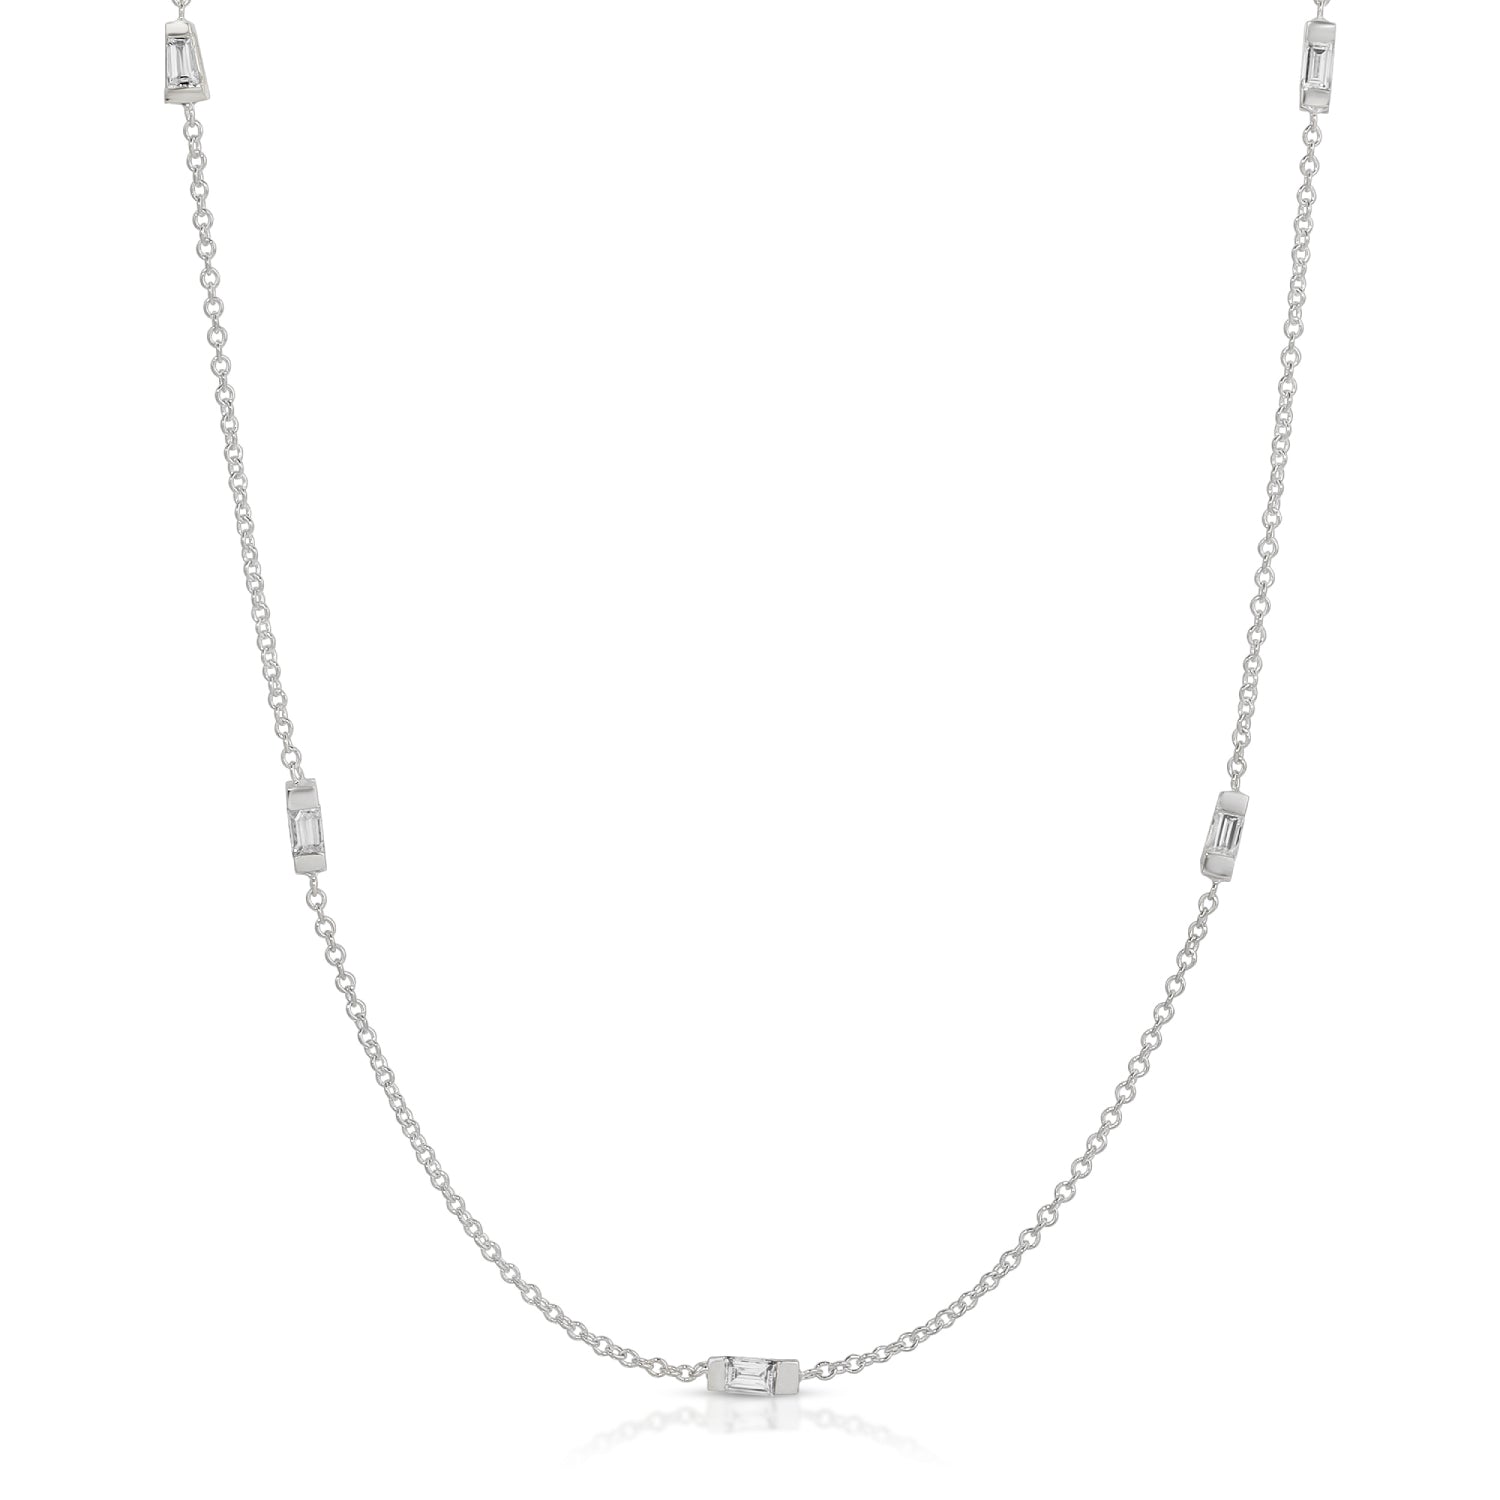 Mixed Baguette Cut Diamond Station Necklace in White Gold